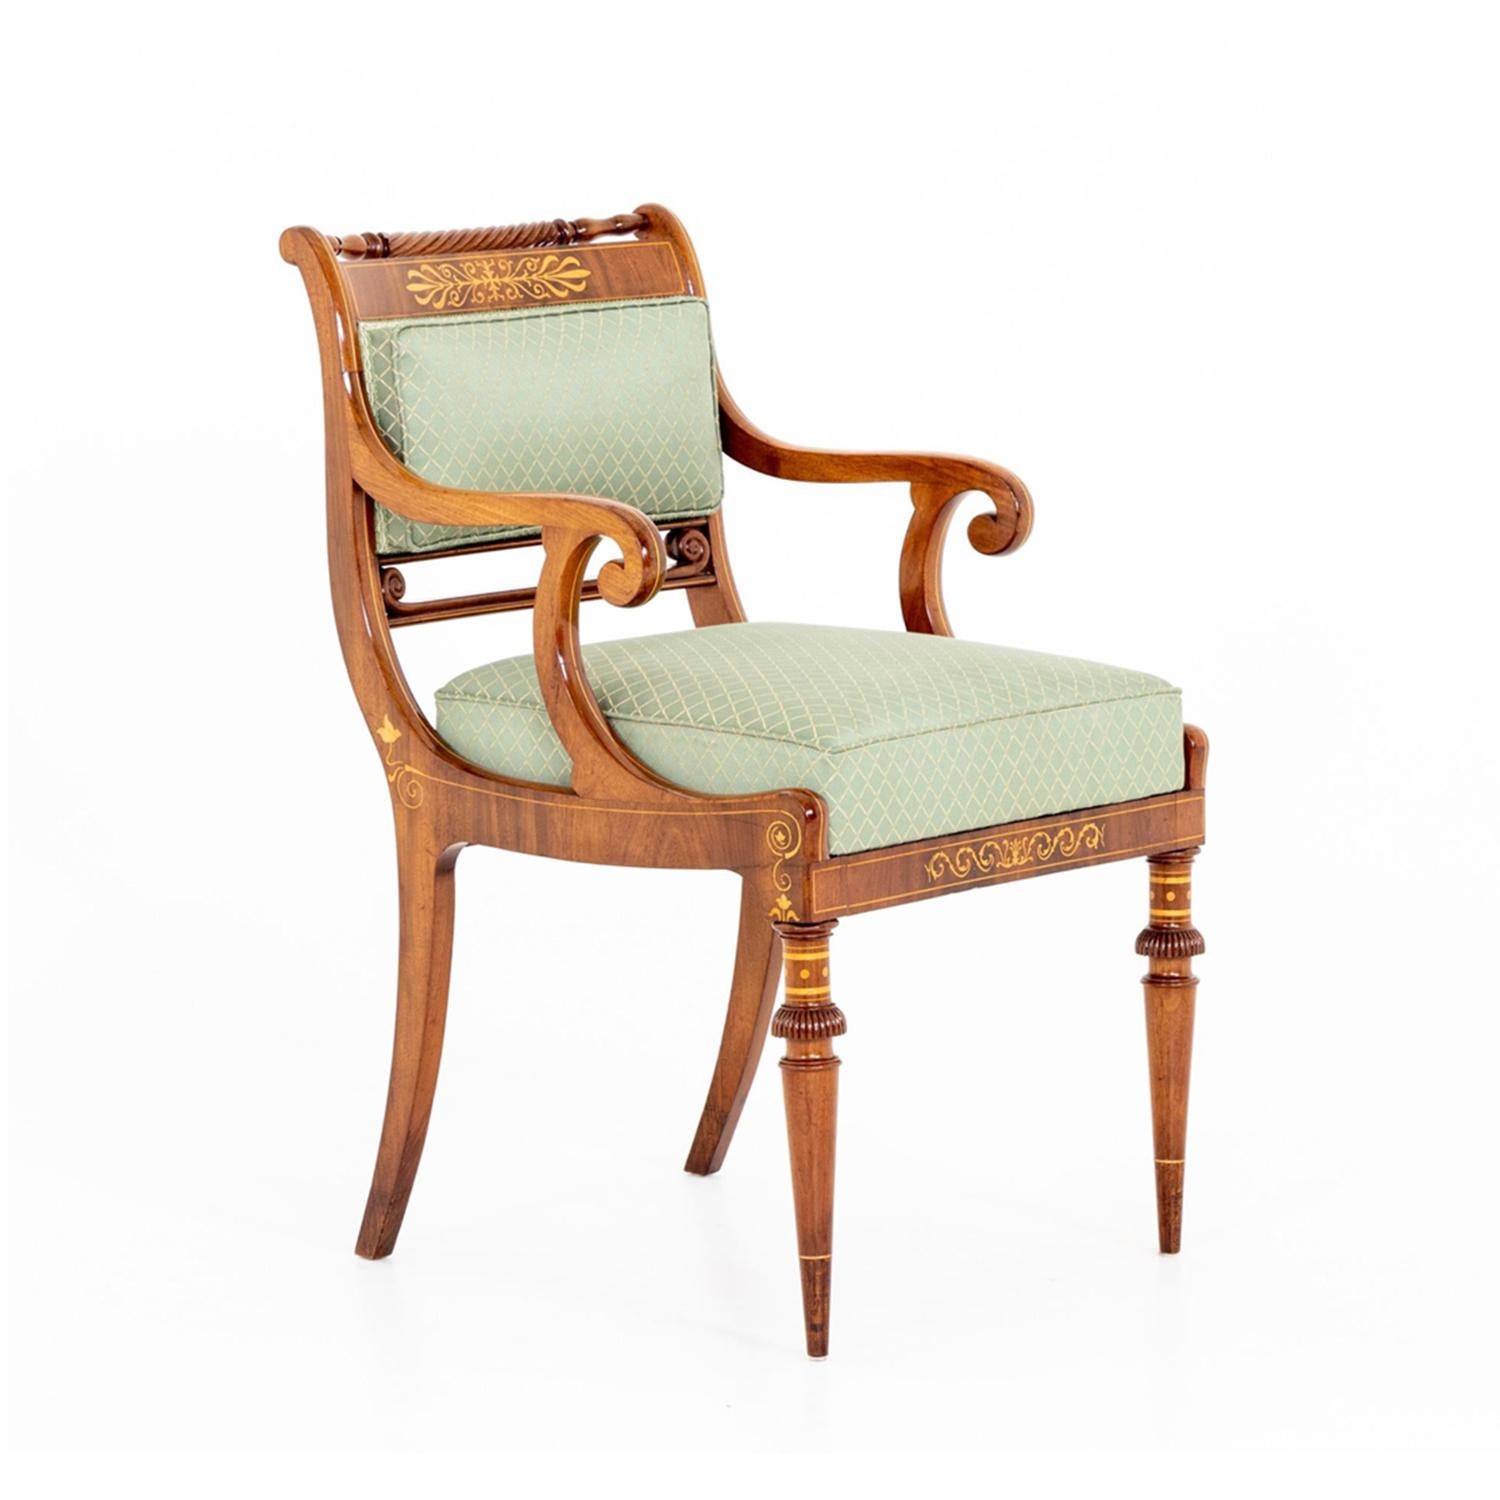 A light-brown, antique Biedermeier German single armchair made of hand crafted shellac polished Mahogany, the fiber décor is made of Maplewood in good condition. The seat backrest of the center, side chair is slightly inclined with thin arched